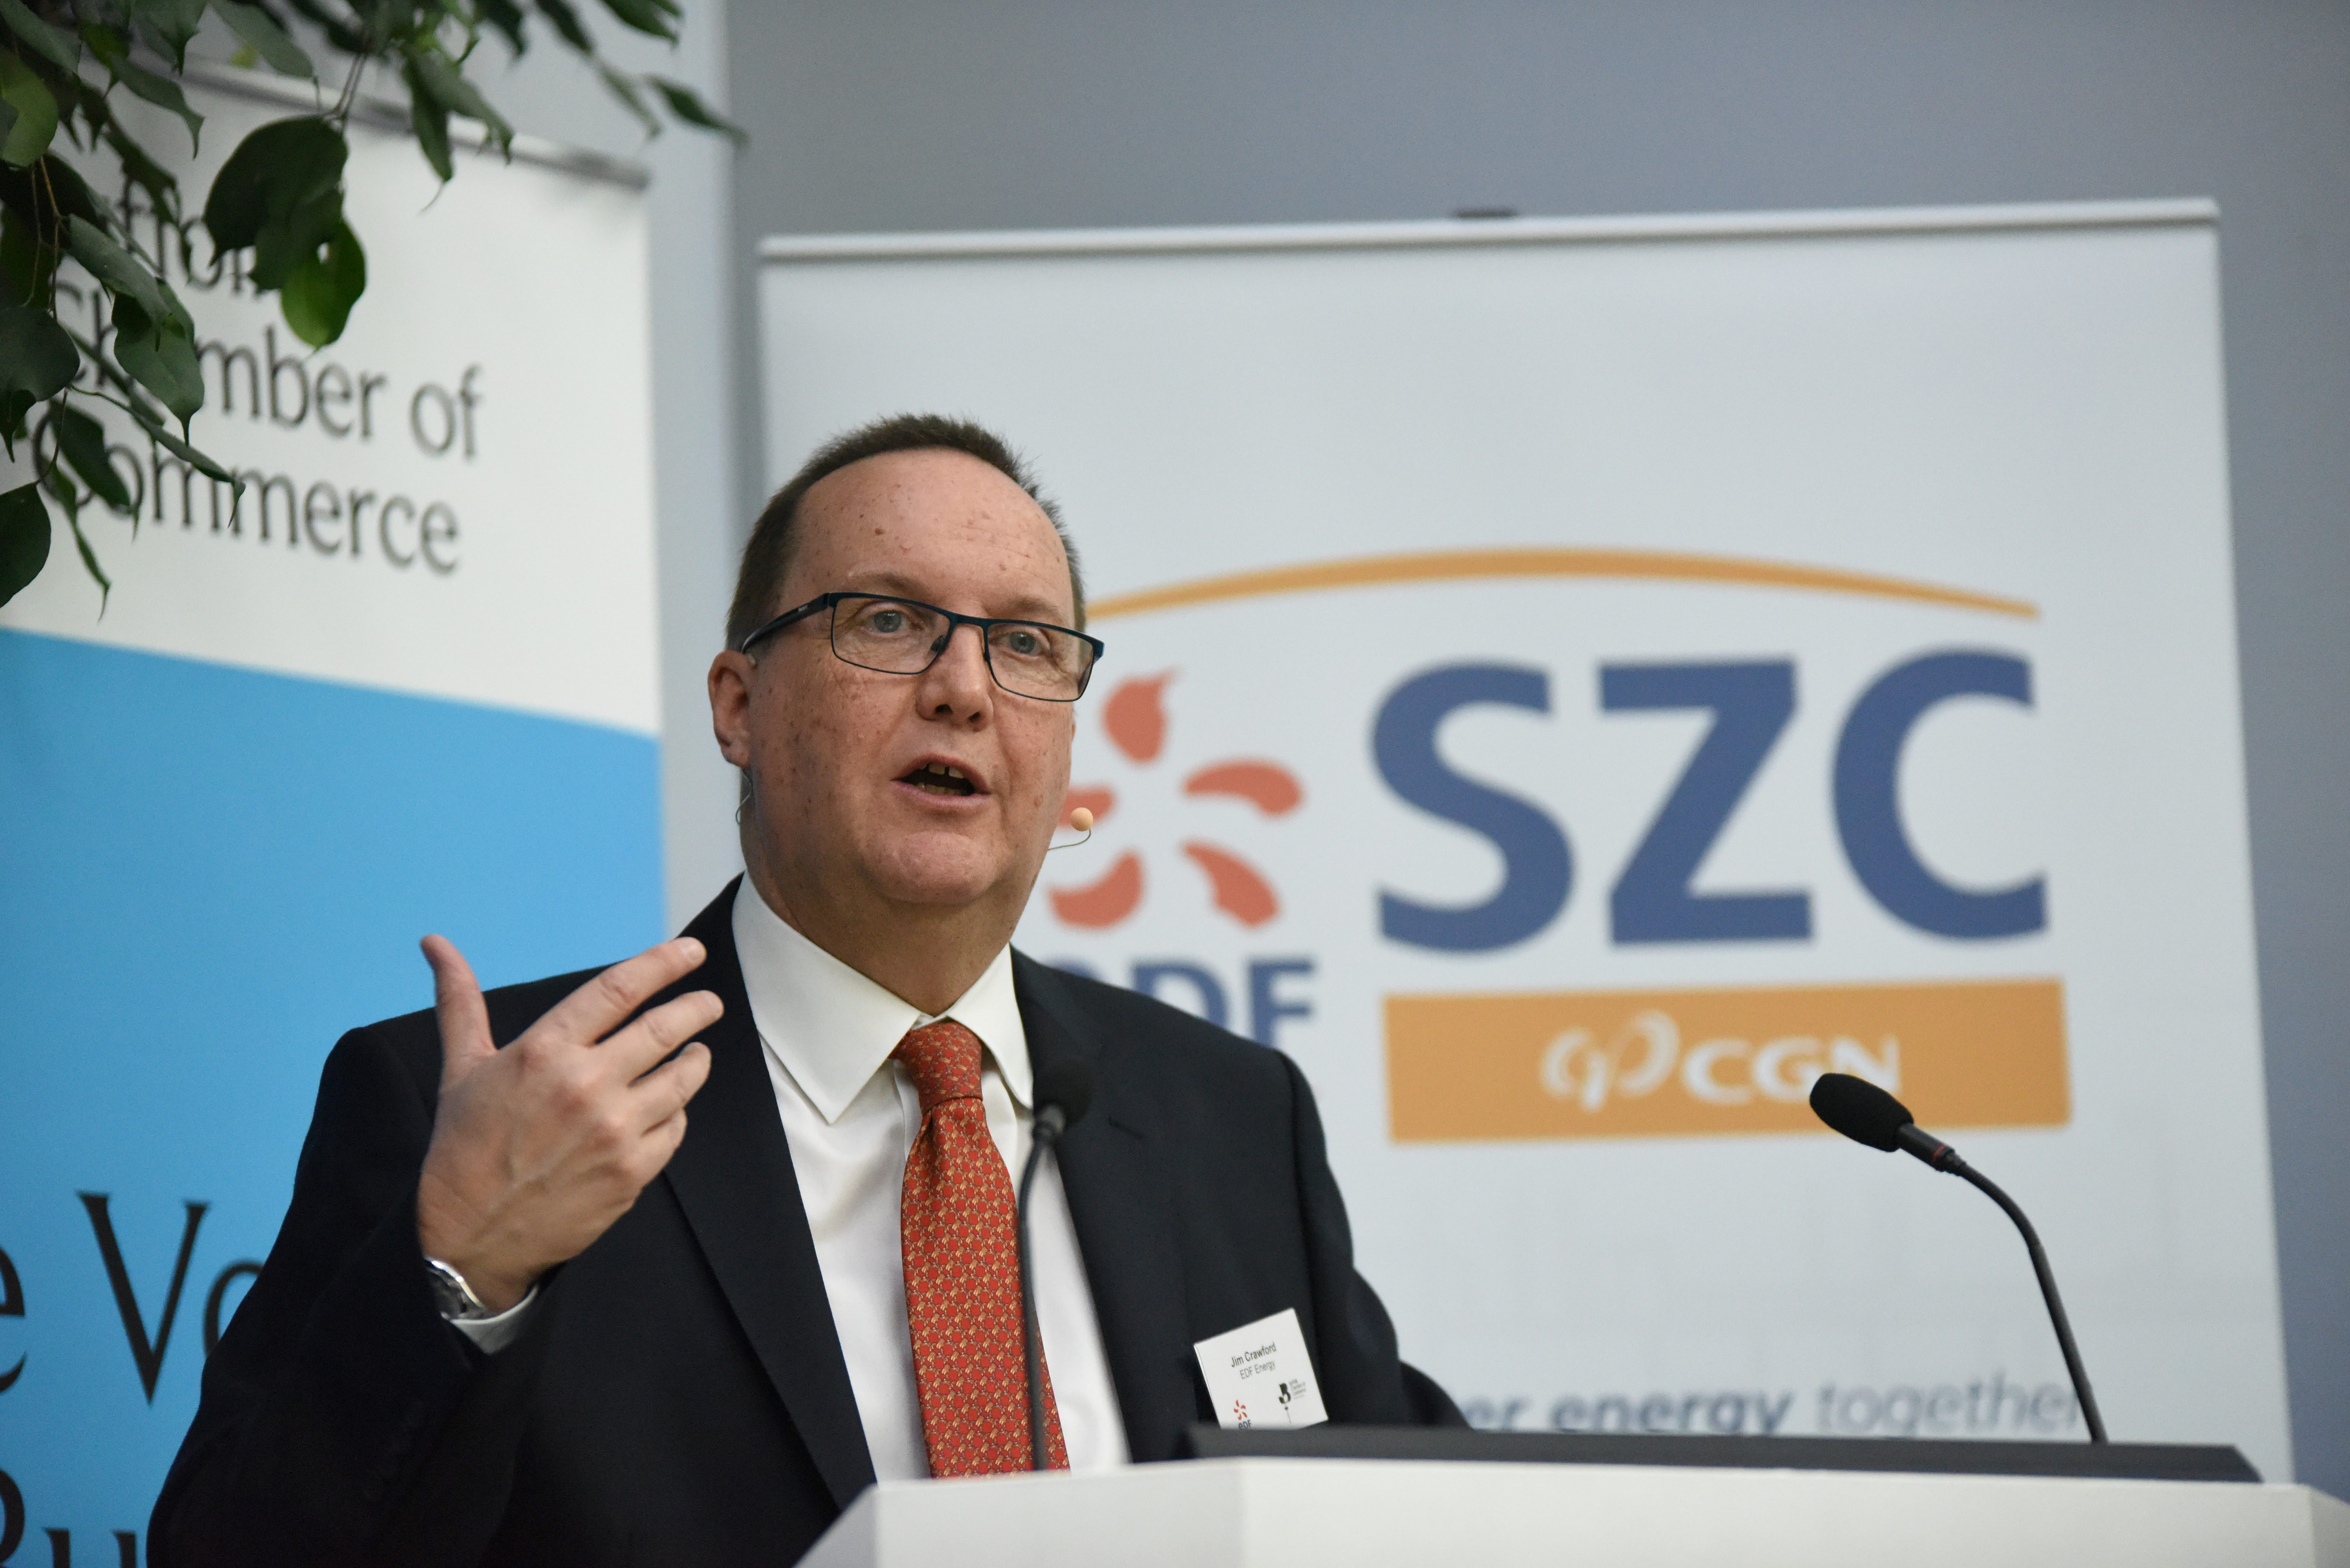 Jim Crawford, Sizewell C project development director speaking at a Suffolk Chamber event - Photo - Spring 